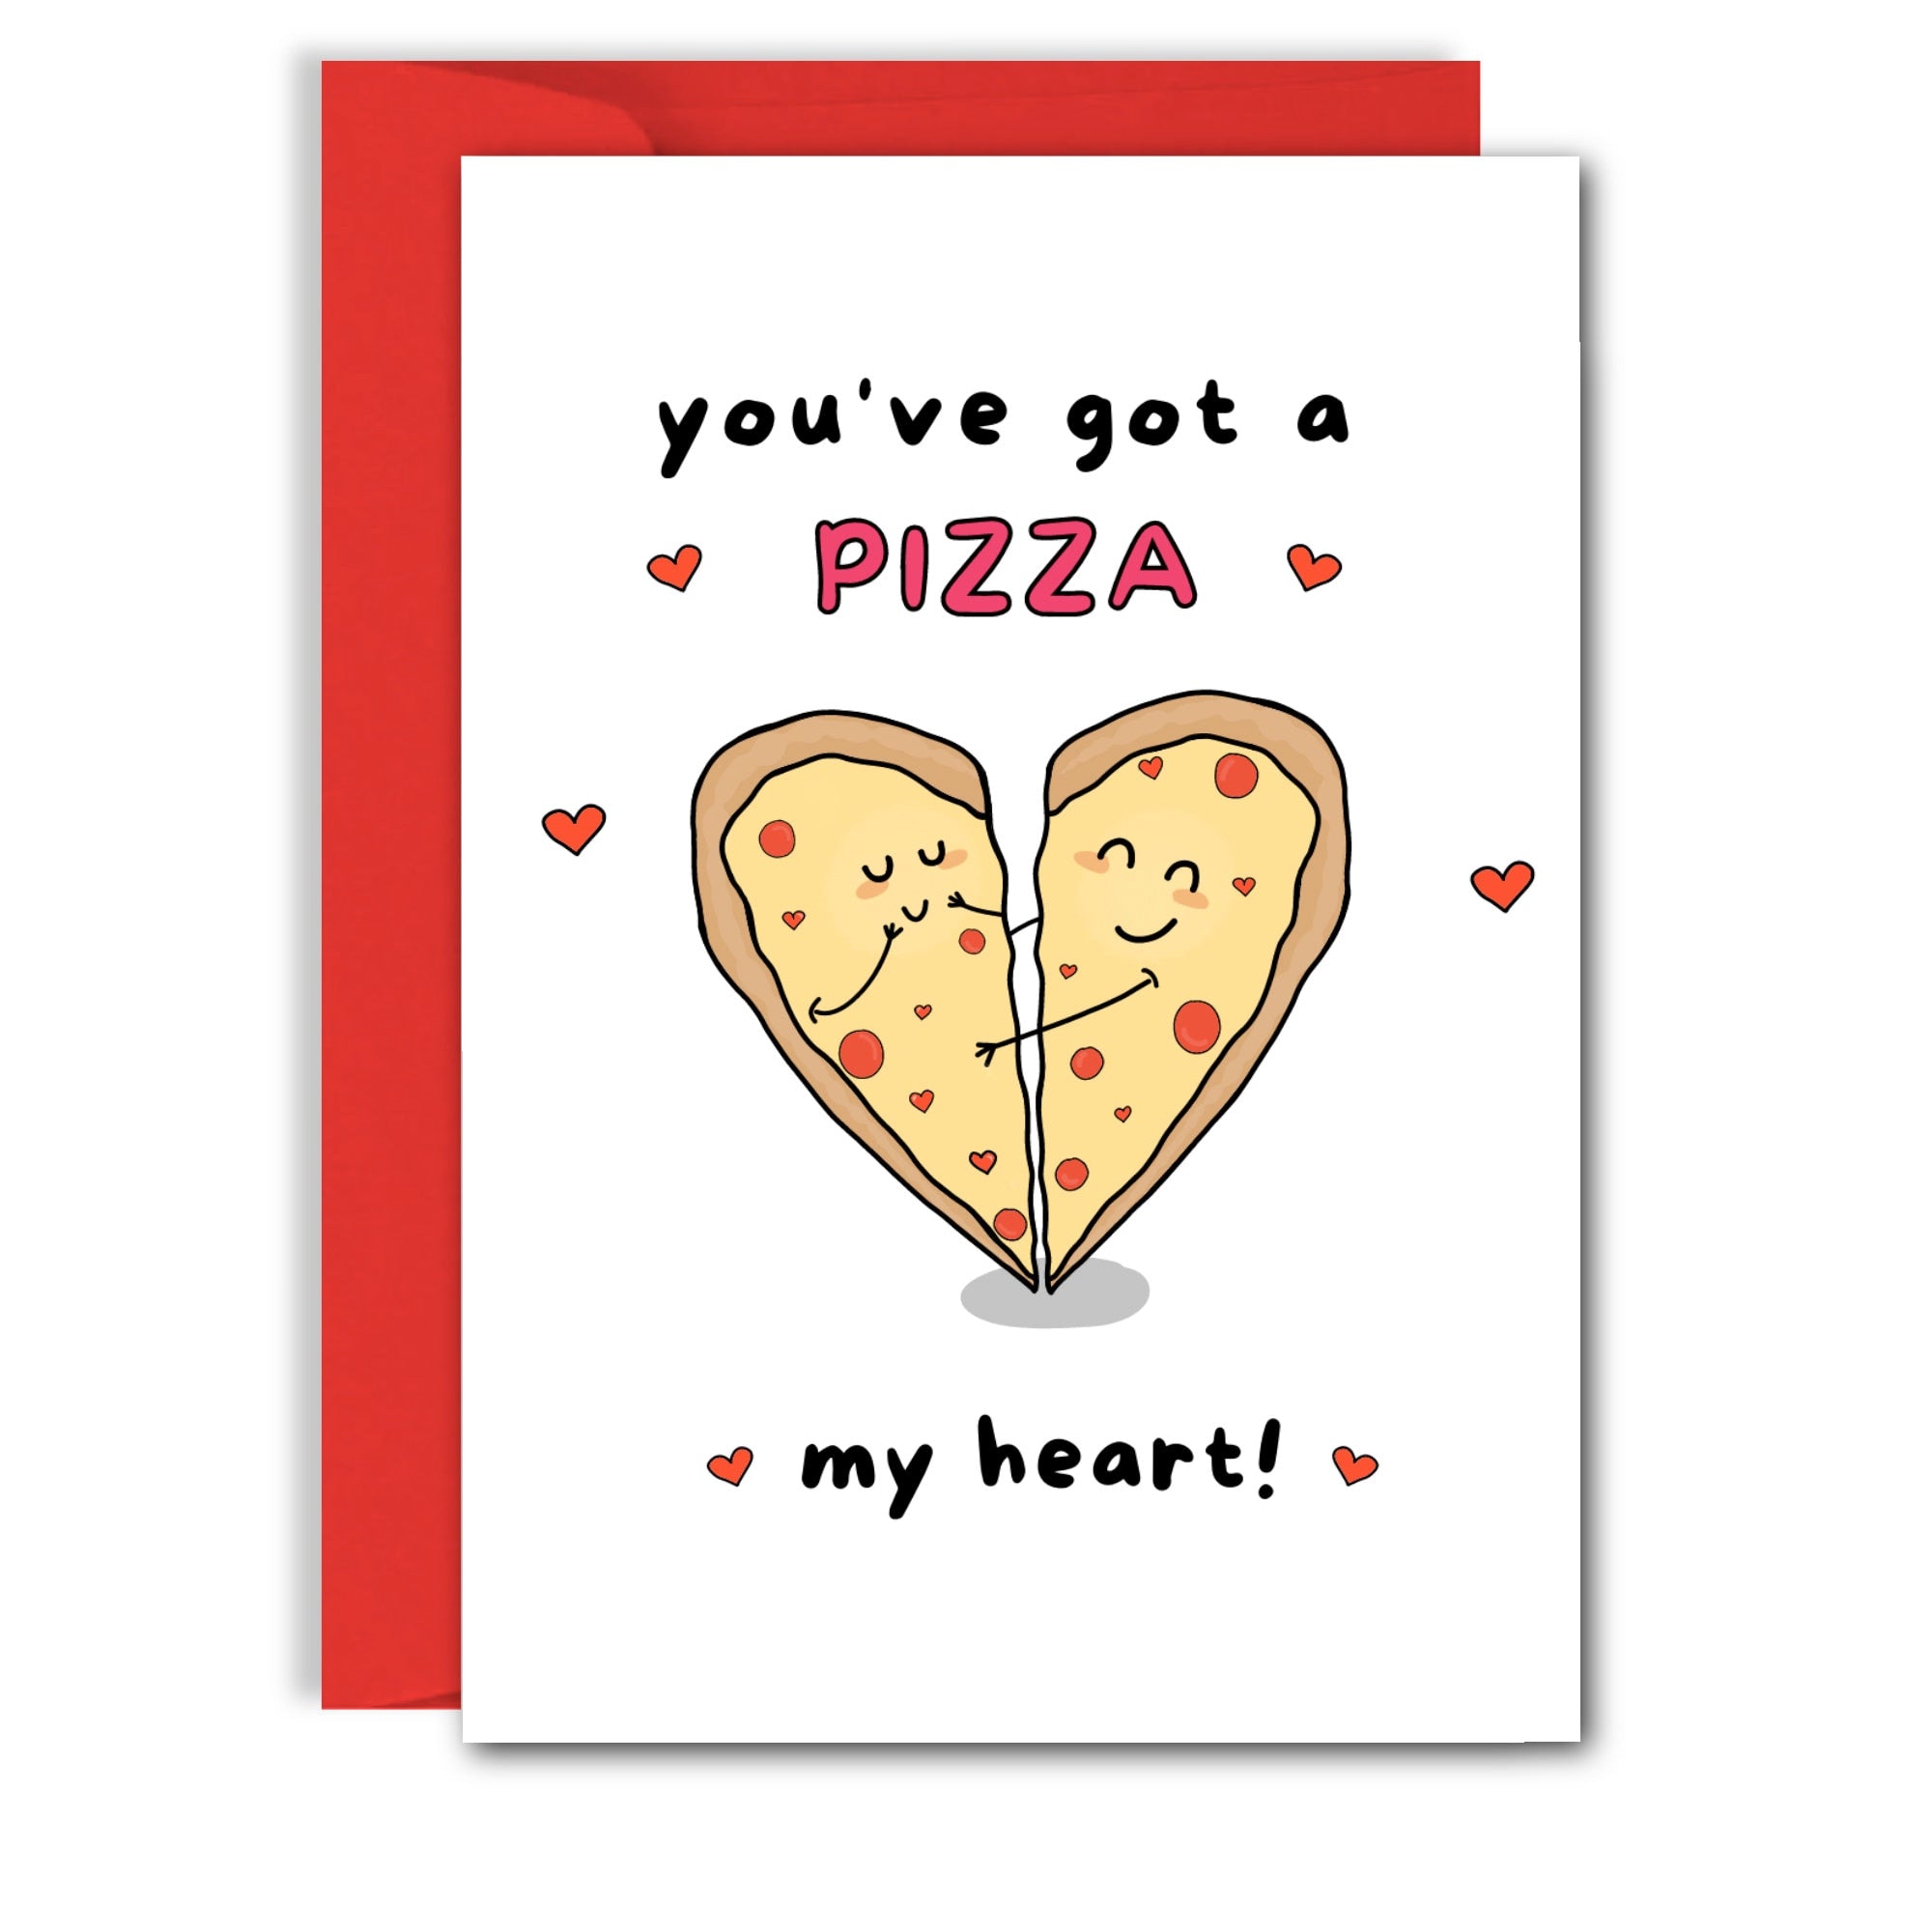 You've Got A Pizza My Heart - Funny Anniversary, For Him, For Her, Birthday Card For Boyfriend, Girlfriend, Husband, Wife, Valentines